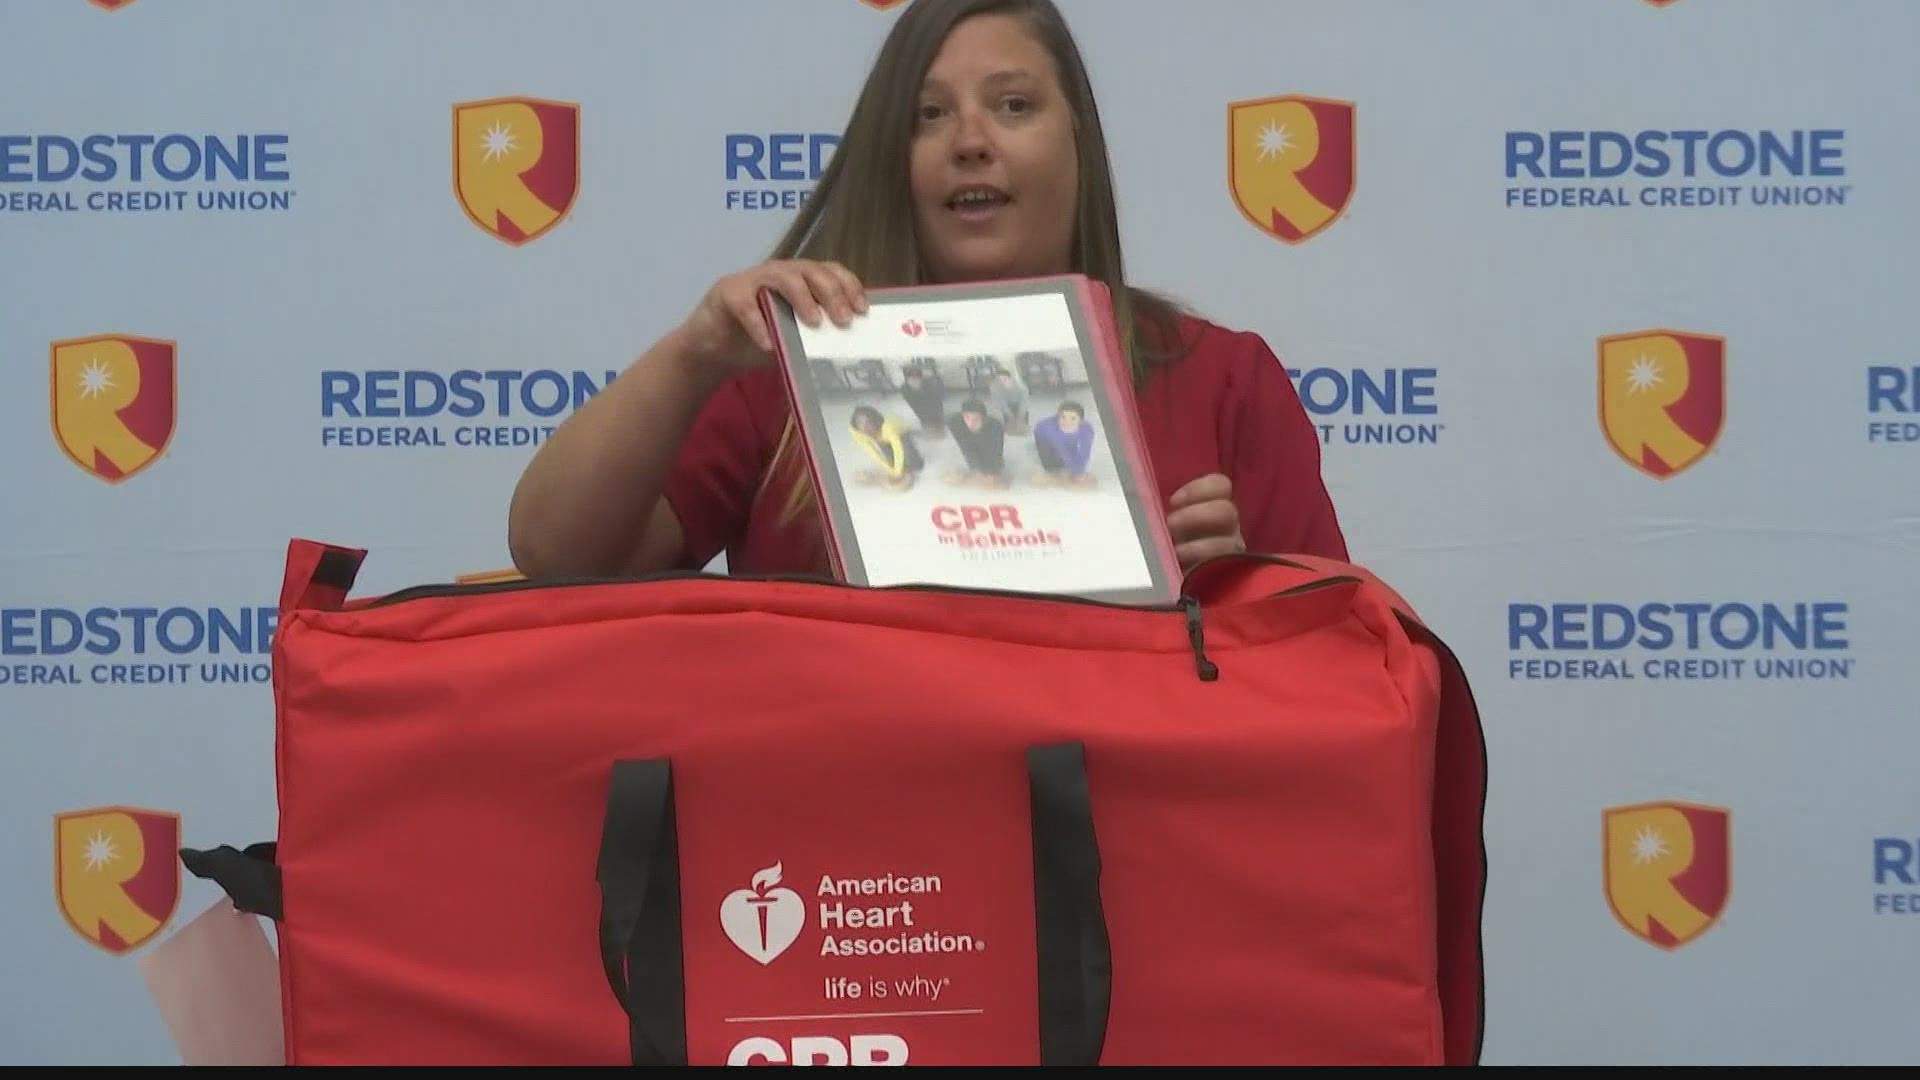 Redstone Federal Credit Union says the kits are worth about 20,000 dollars. But, the lifesaving training students will receive is priceless.